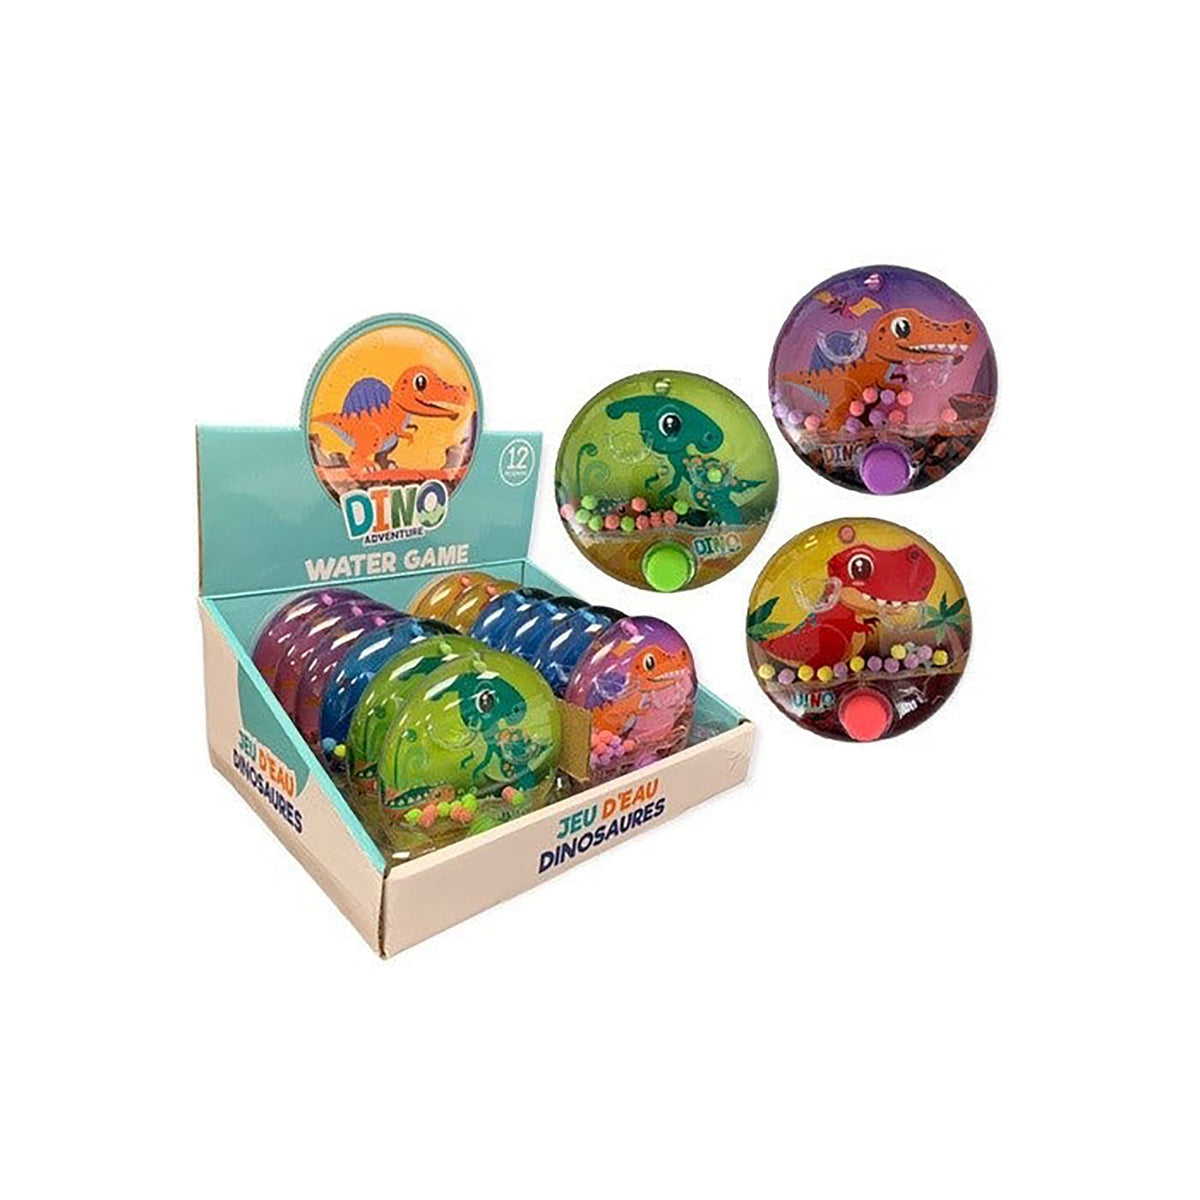 HANDEE PRODUCTS/LES PRODUITS H Impulse Buying Portable Dinosaur Water Game, Assortment, 1 Count 064049517226